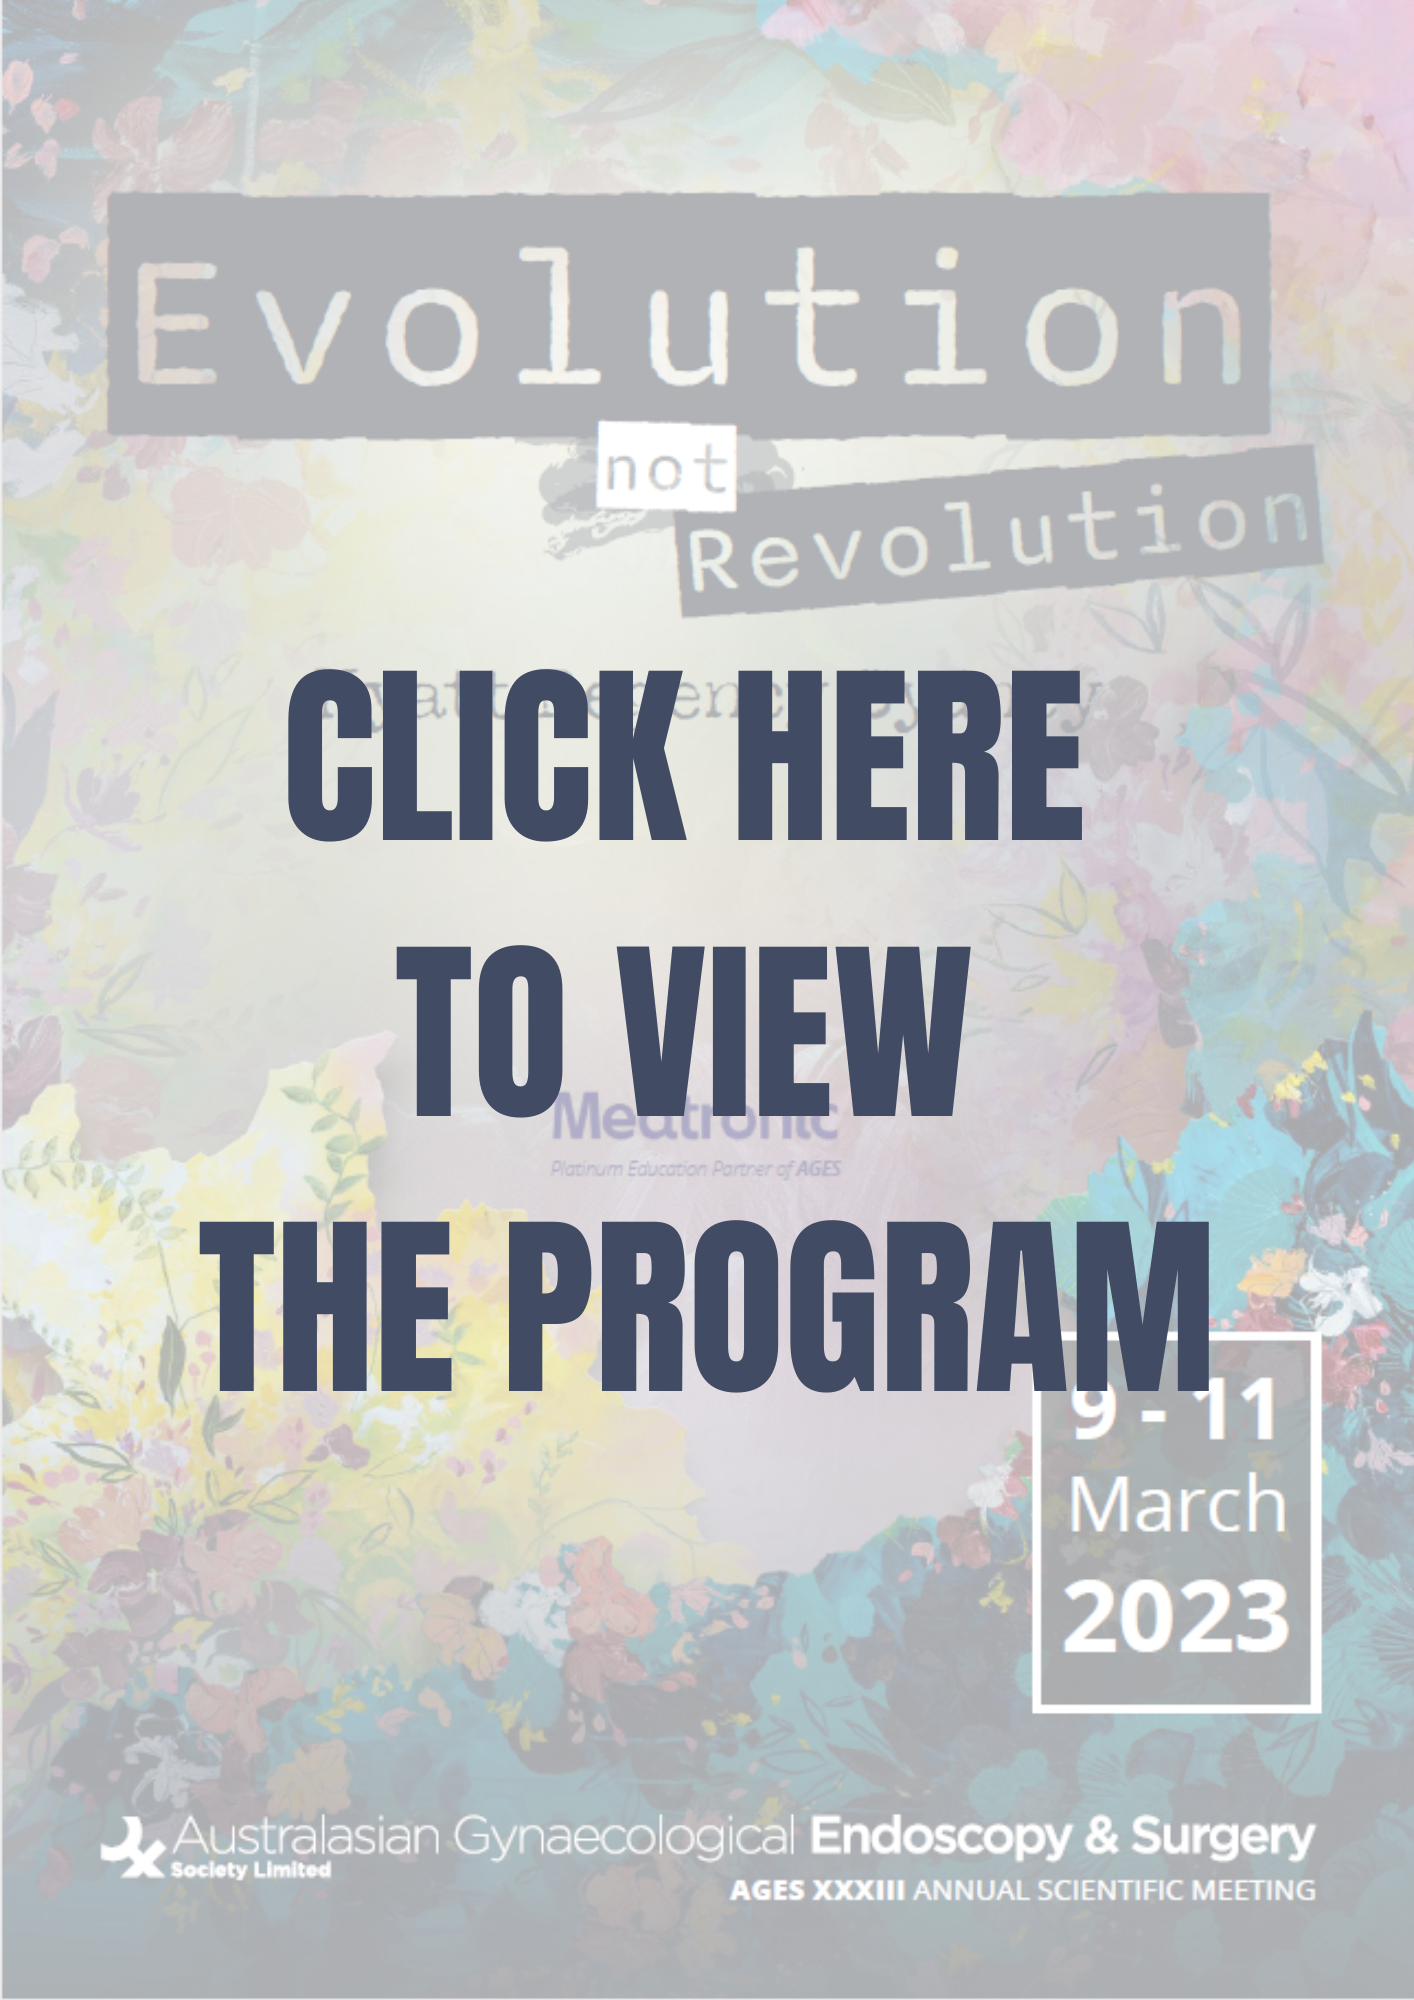 CLICK HERE TO VIEW THE PROGRAM